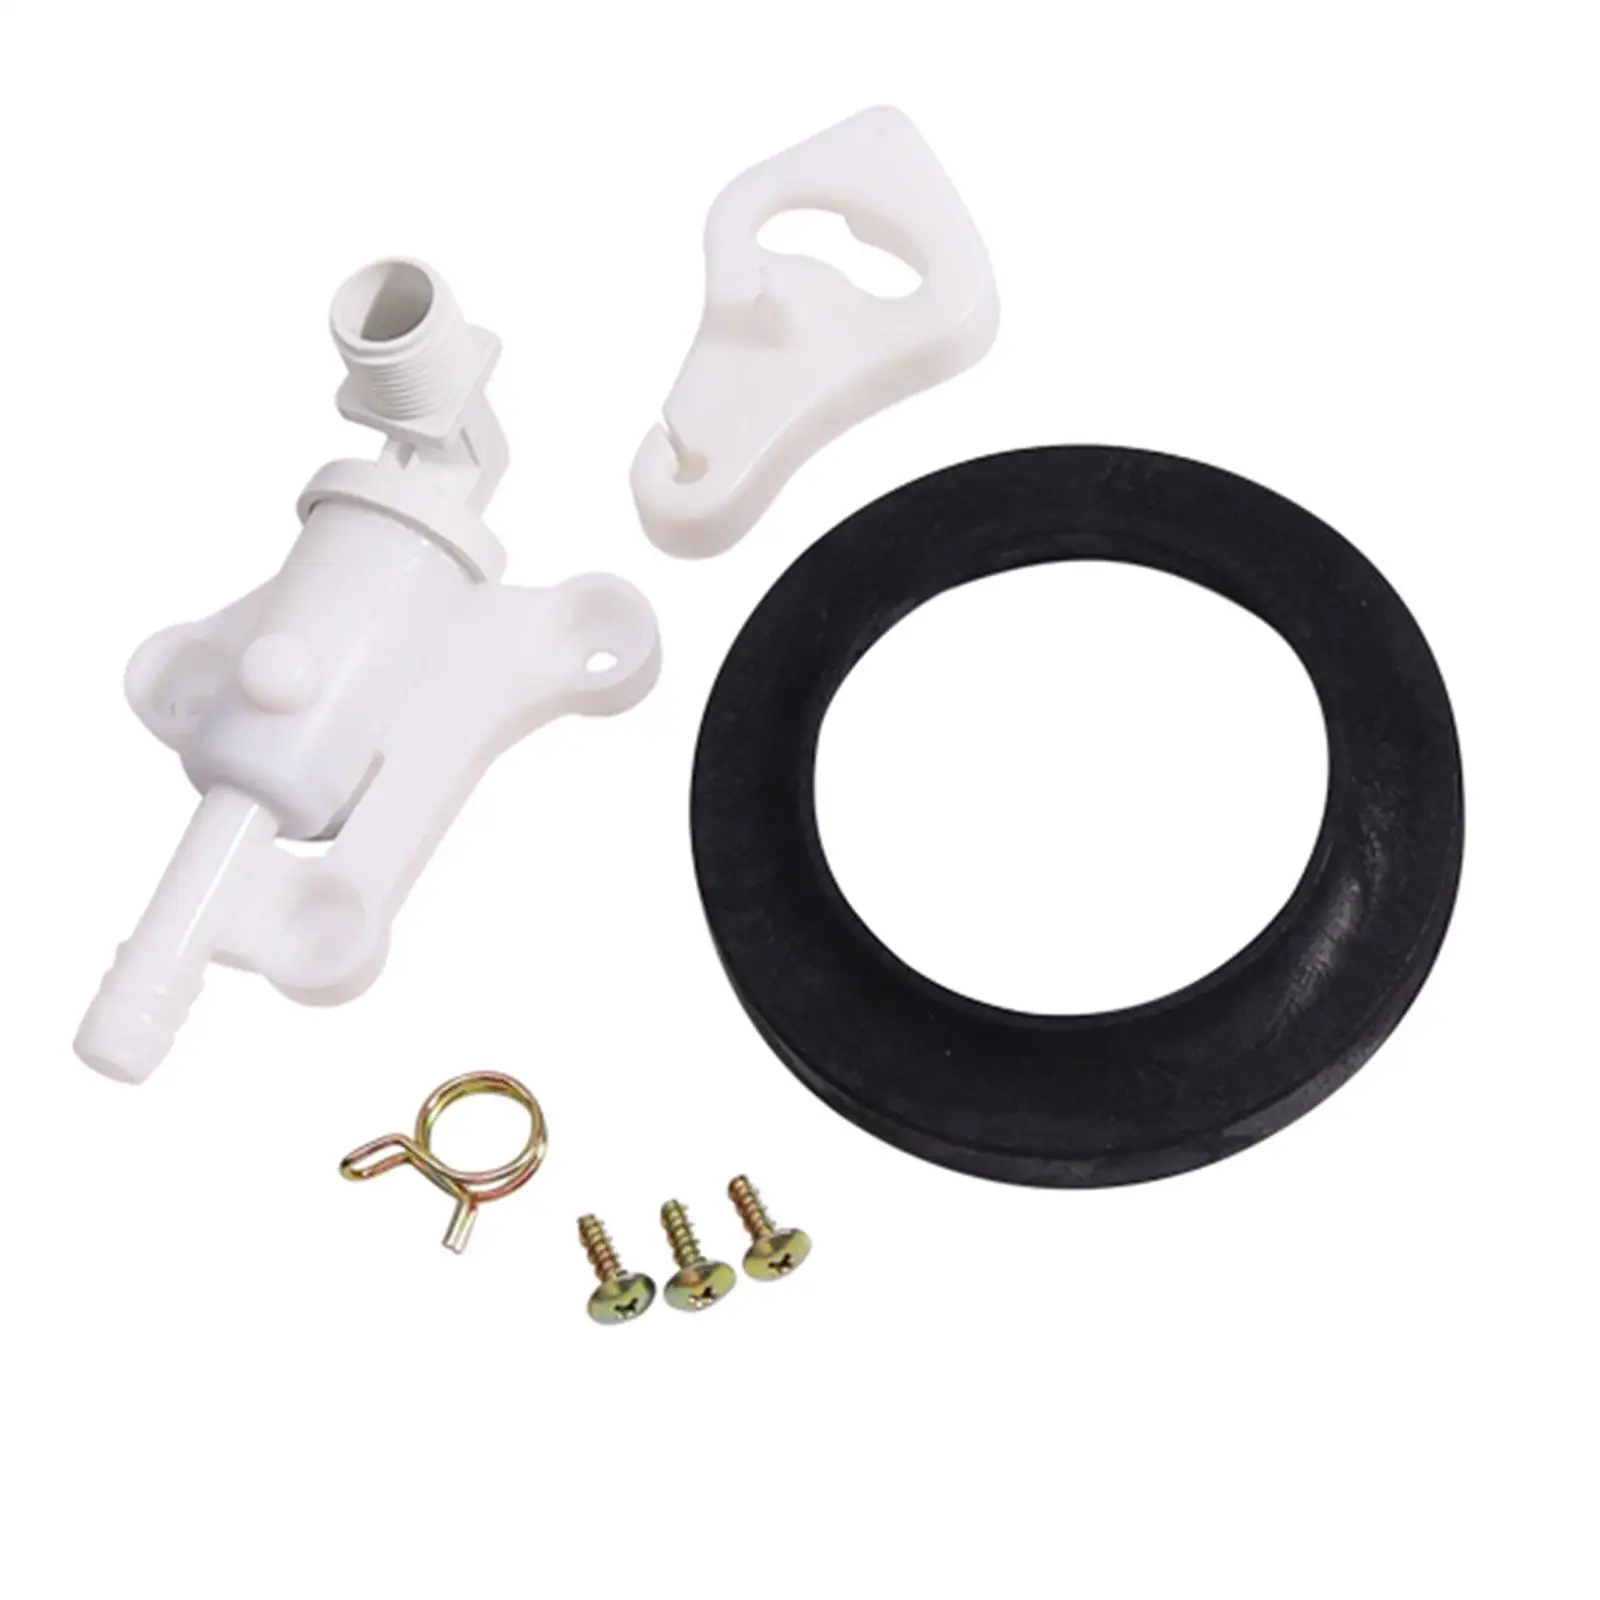 34100 RV Toilet Water Valve for Style Lite Toilets Accessory Replace Parts for Convenient Practical Durable Easy to Install